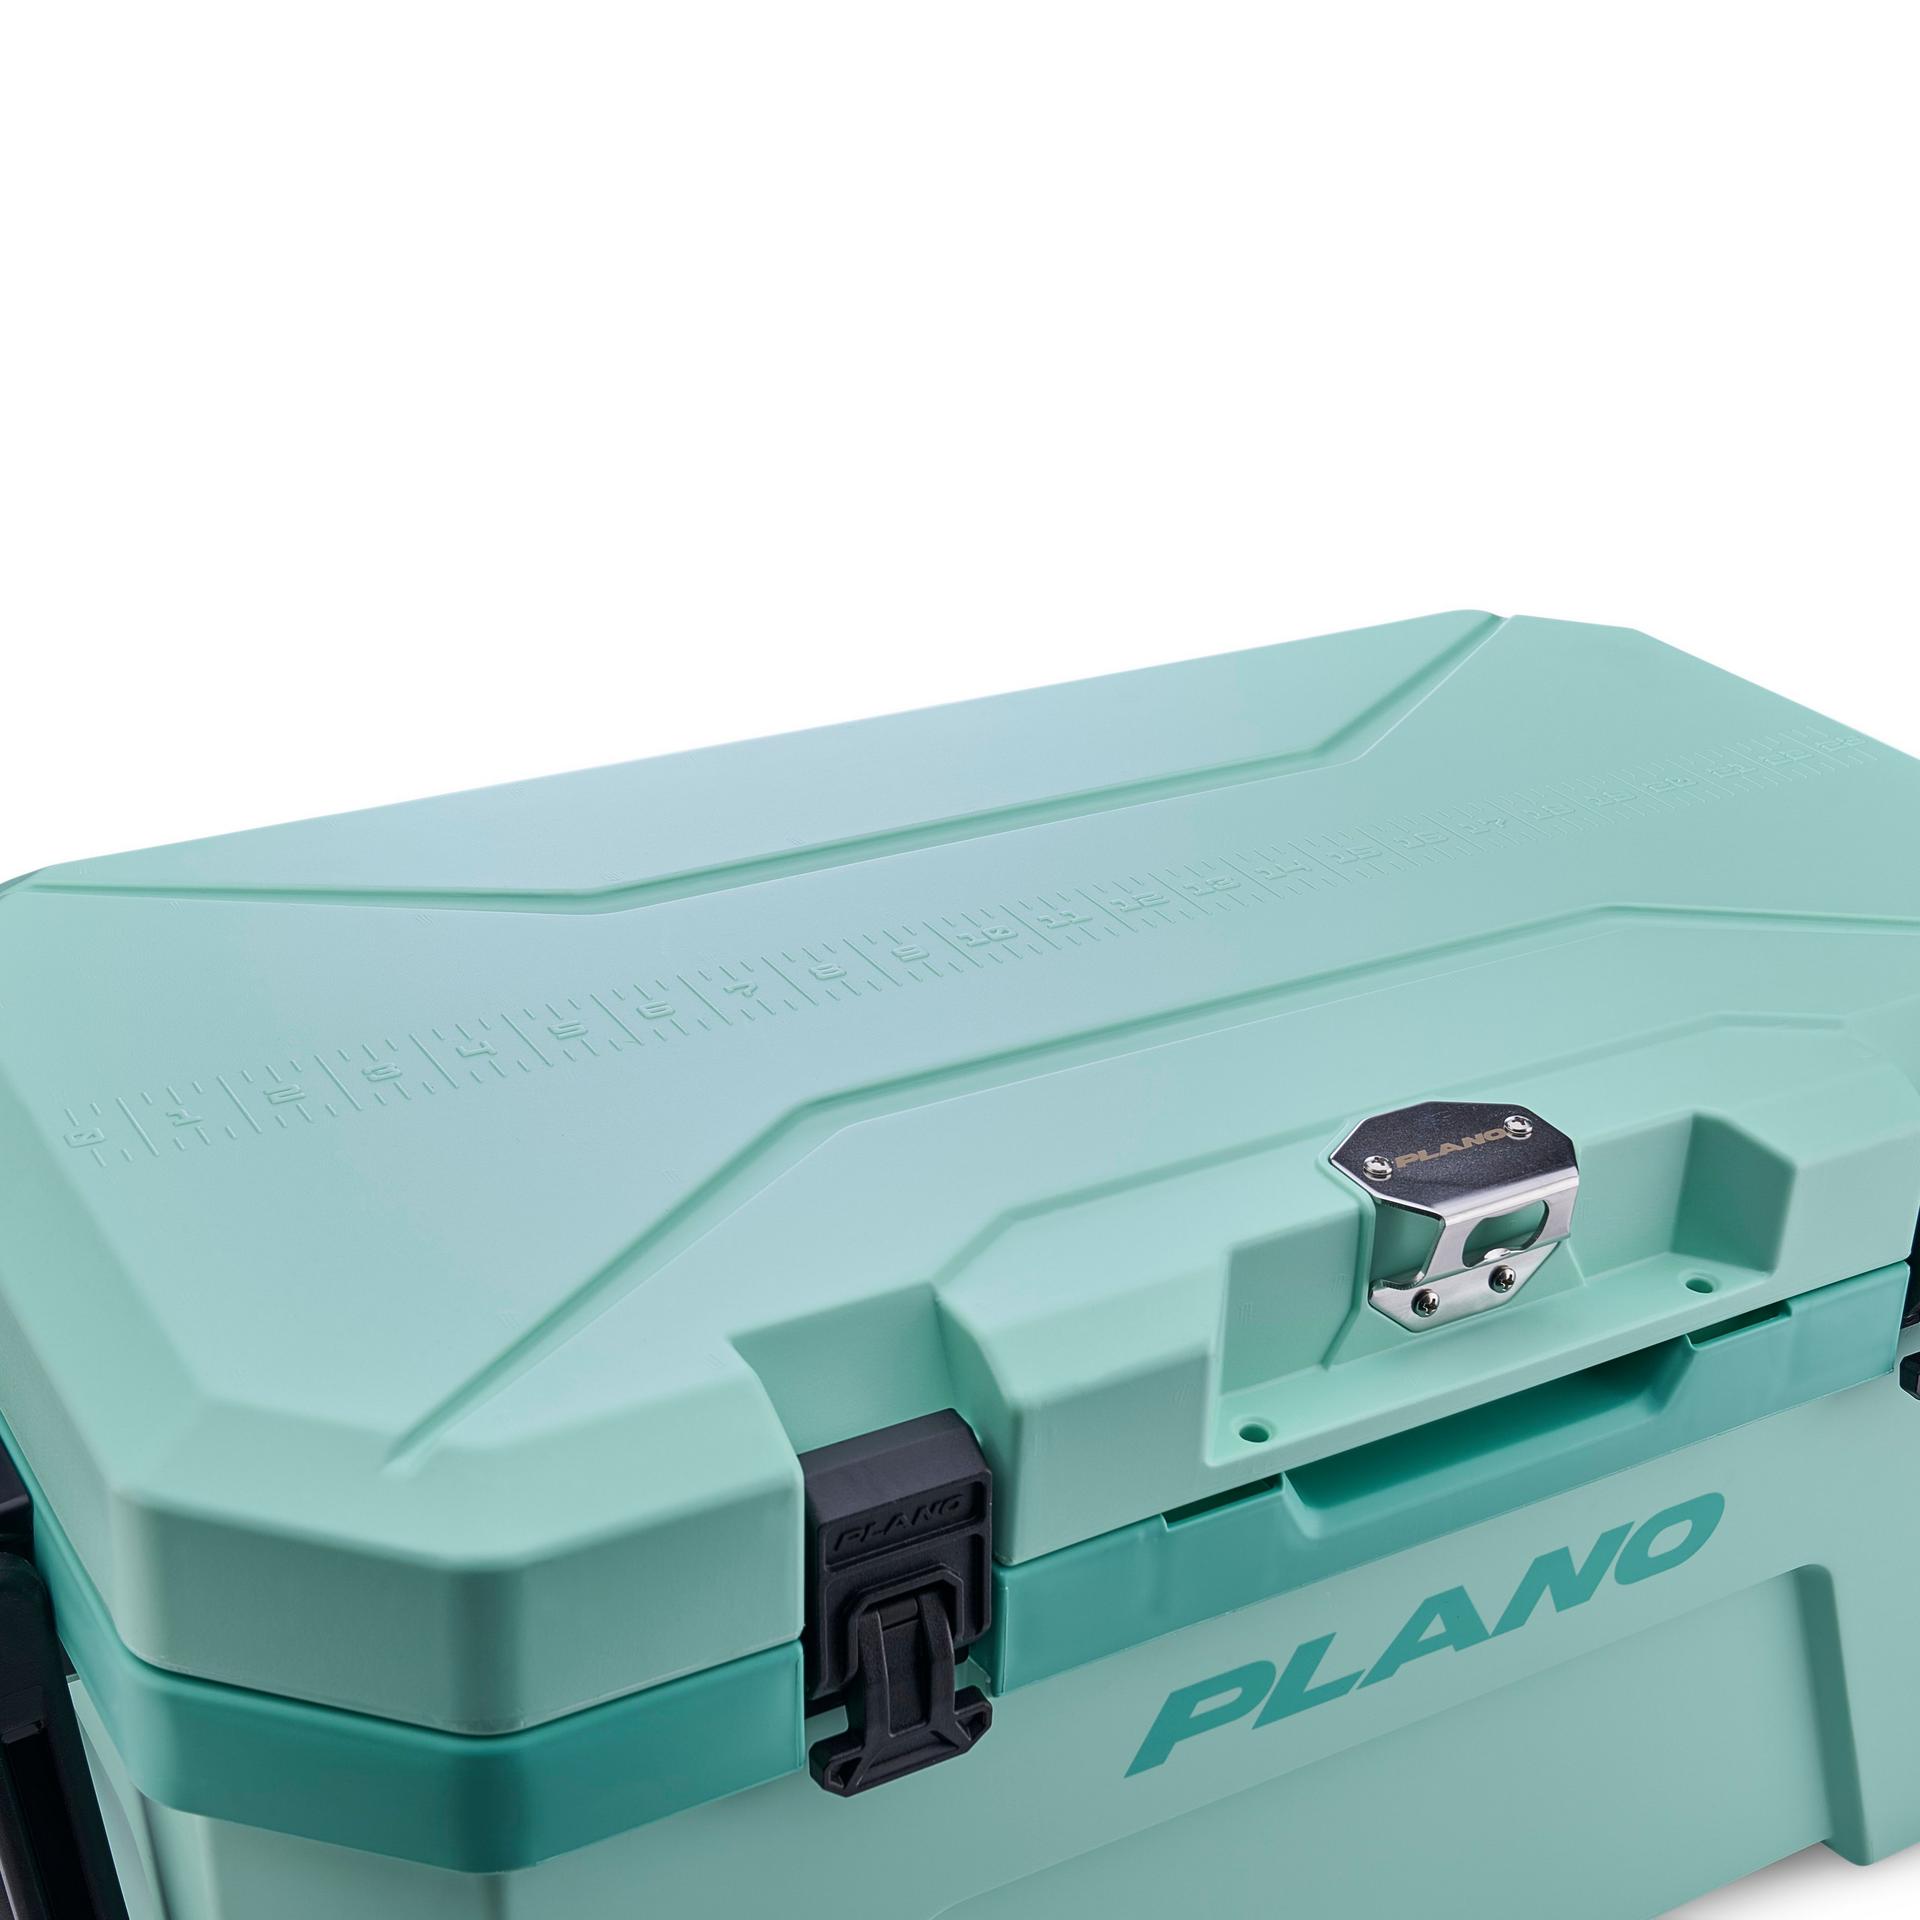 Frost Cooler 32 Quart (30 L) | Plano®